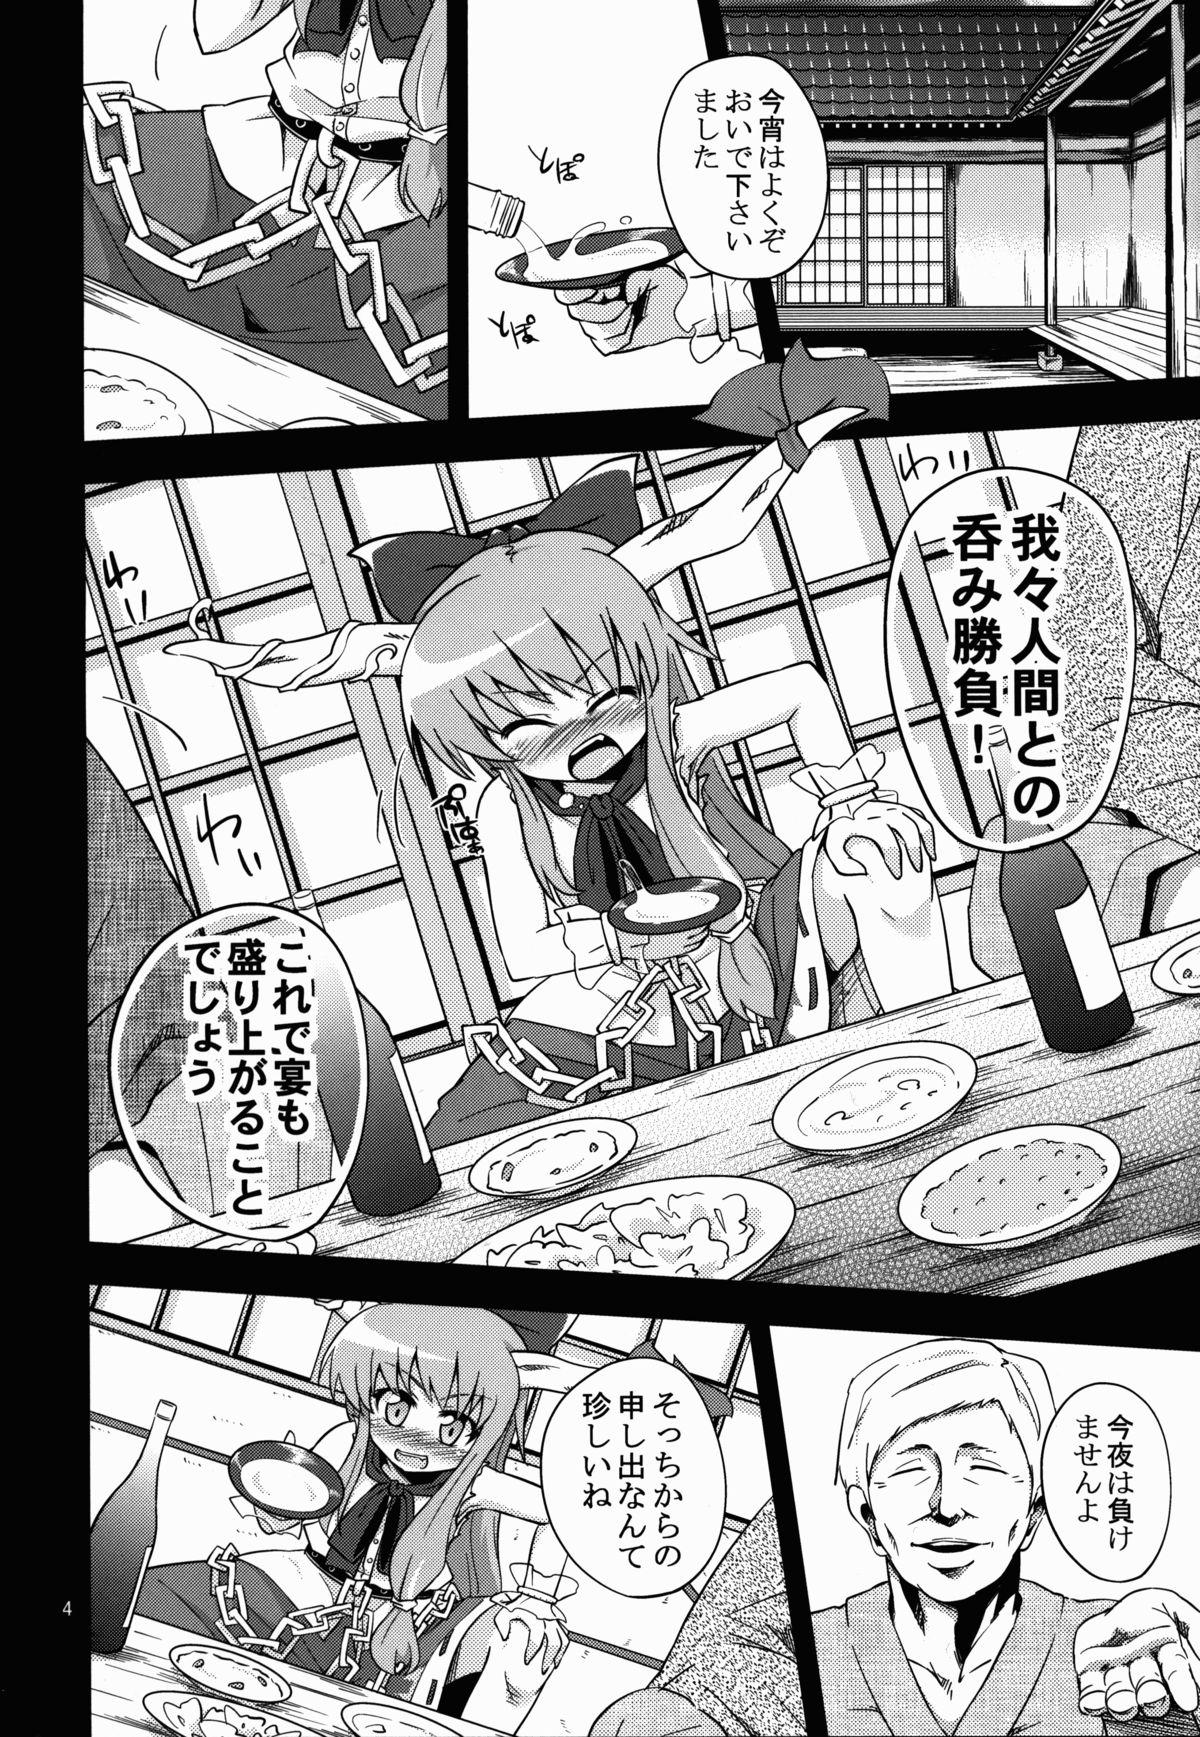 Whooty 鬼犯嘘犯喜 - Touhou project Milfsex - Page 4